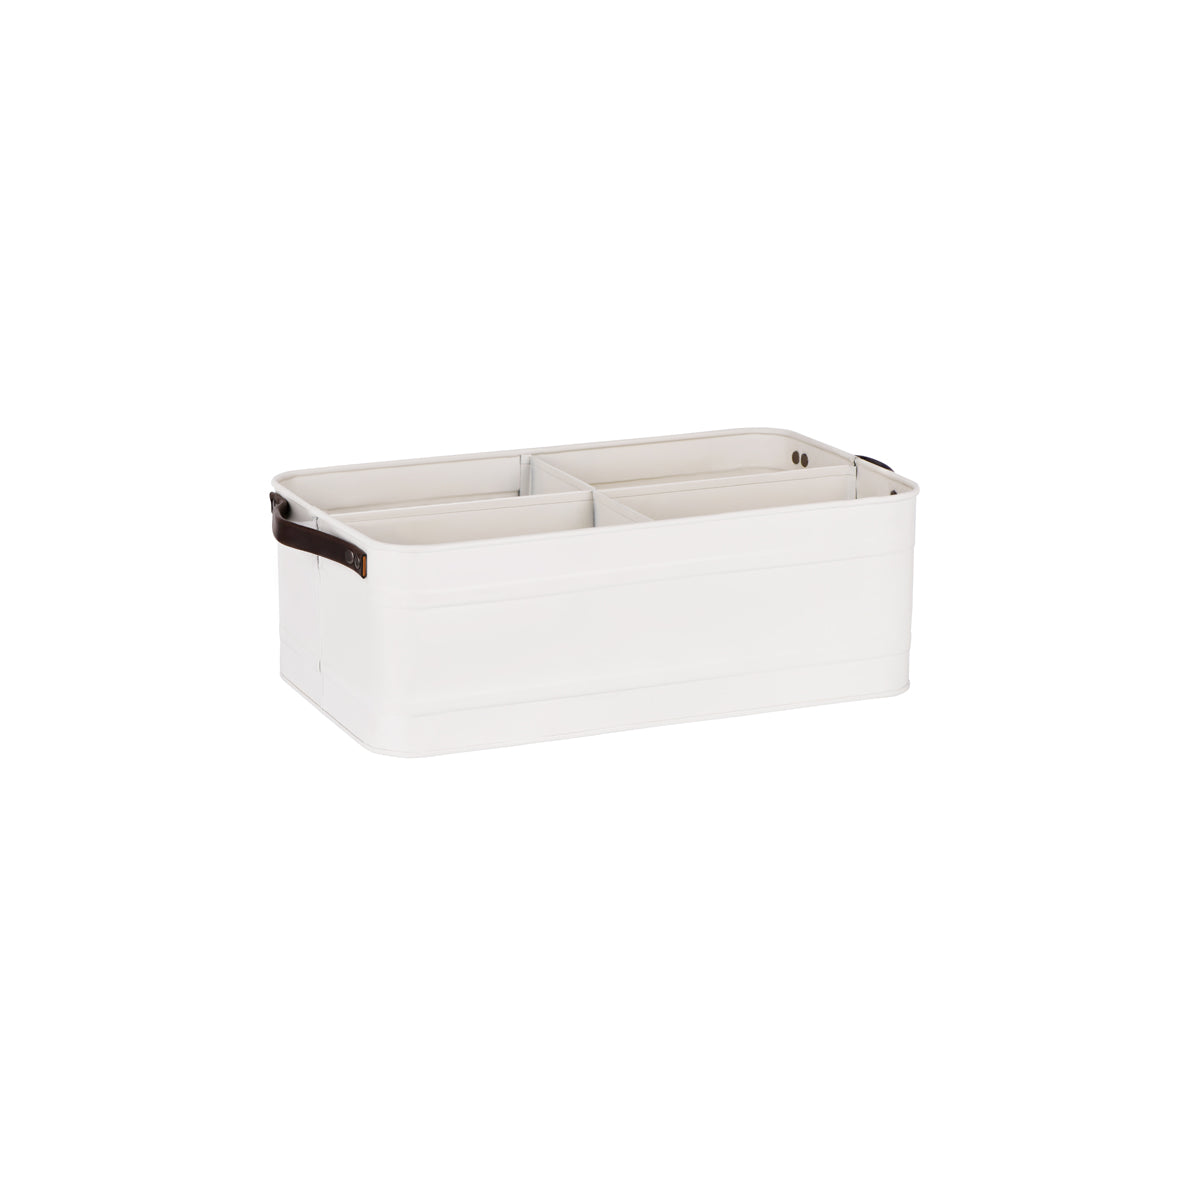 78808 Chef Inox Coney Island Creme Powder Coated 4 Compartment Caddy with Leather Handle 370x215mm Tomkin Australia Hospitality Supplies